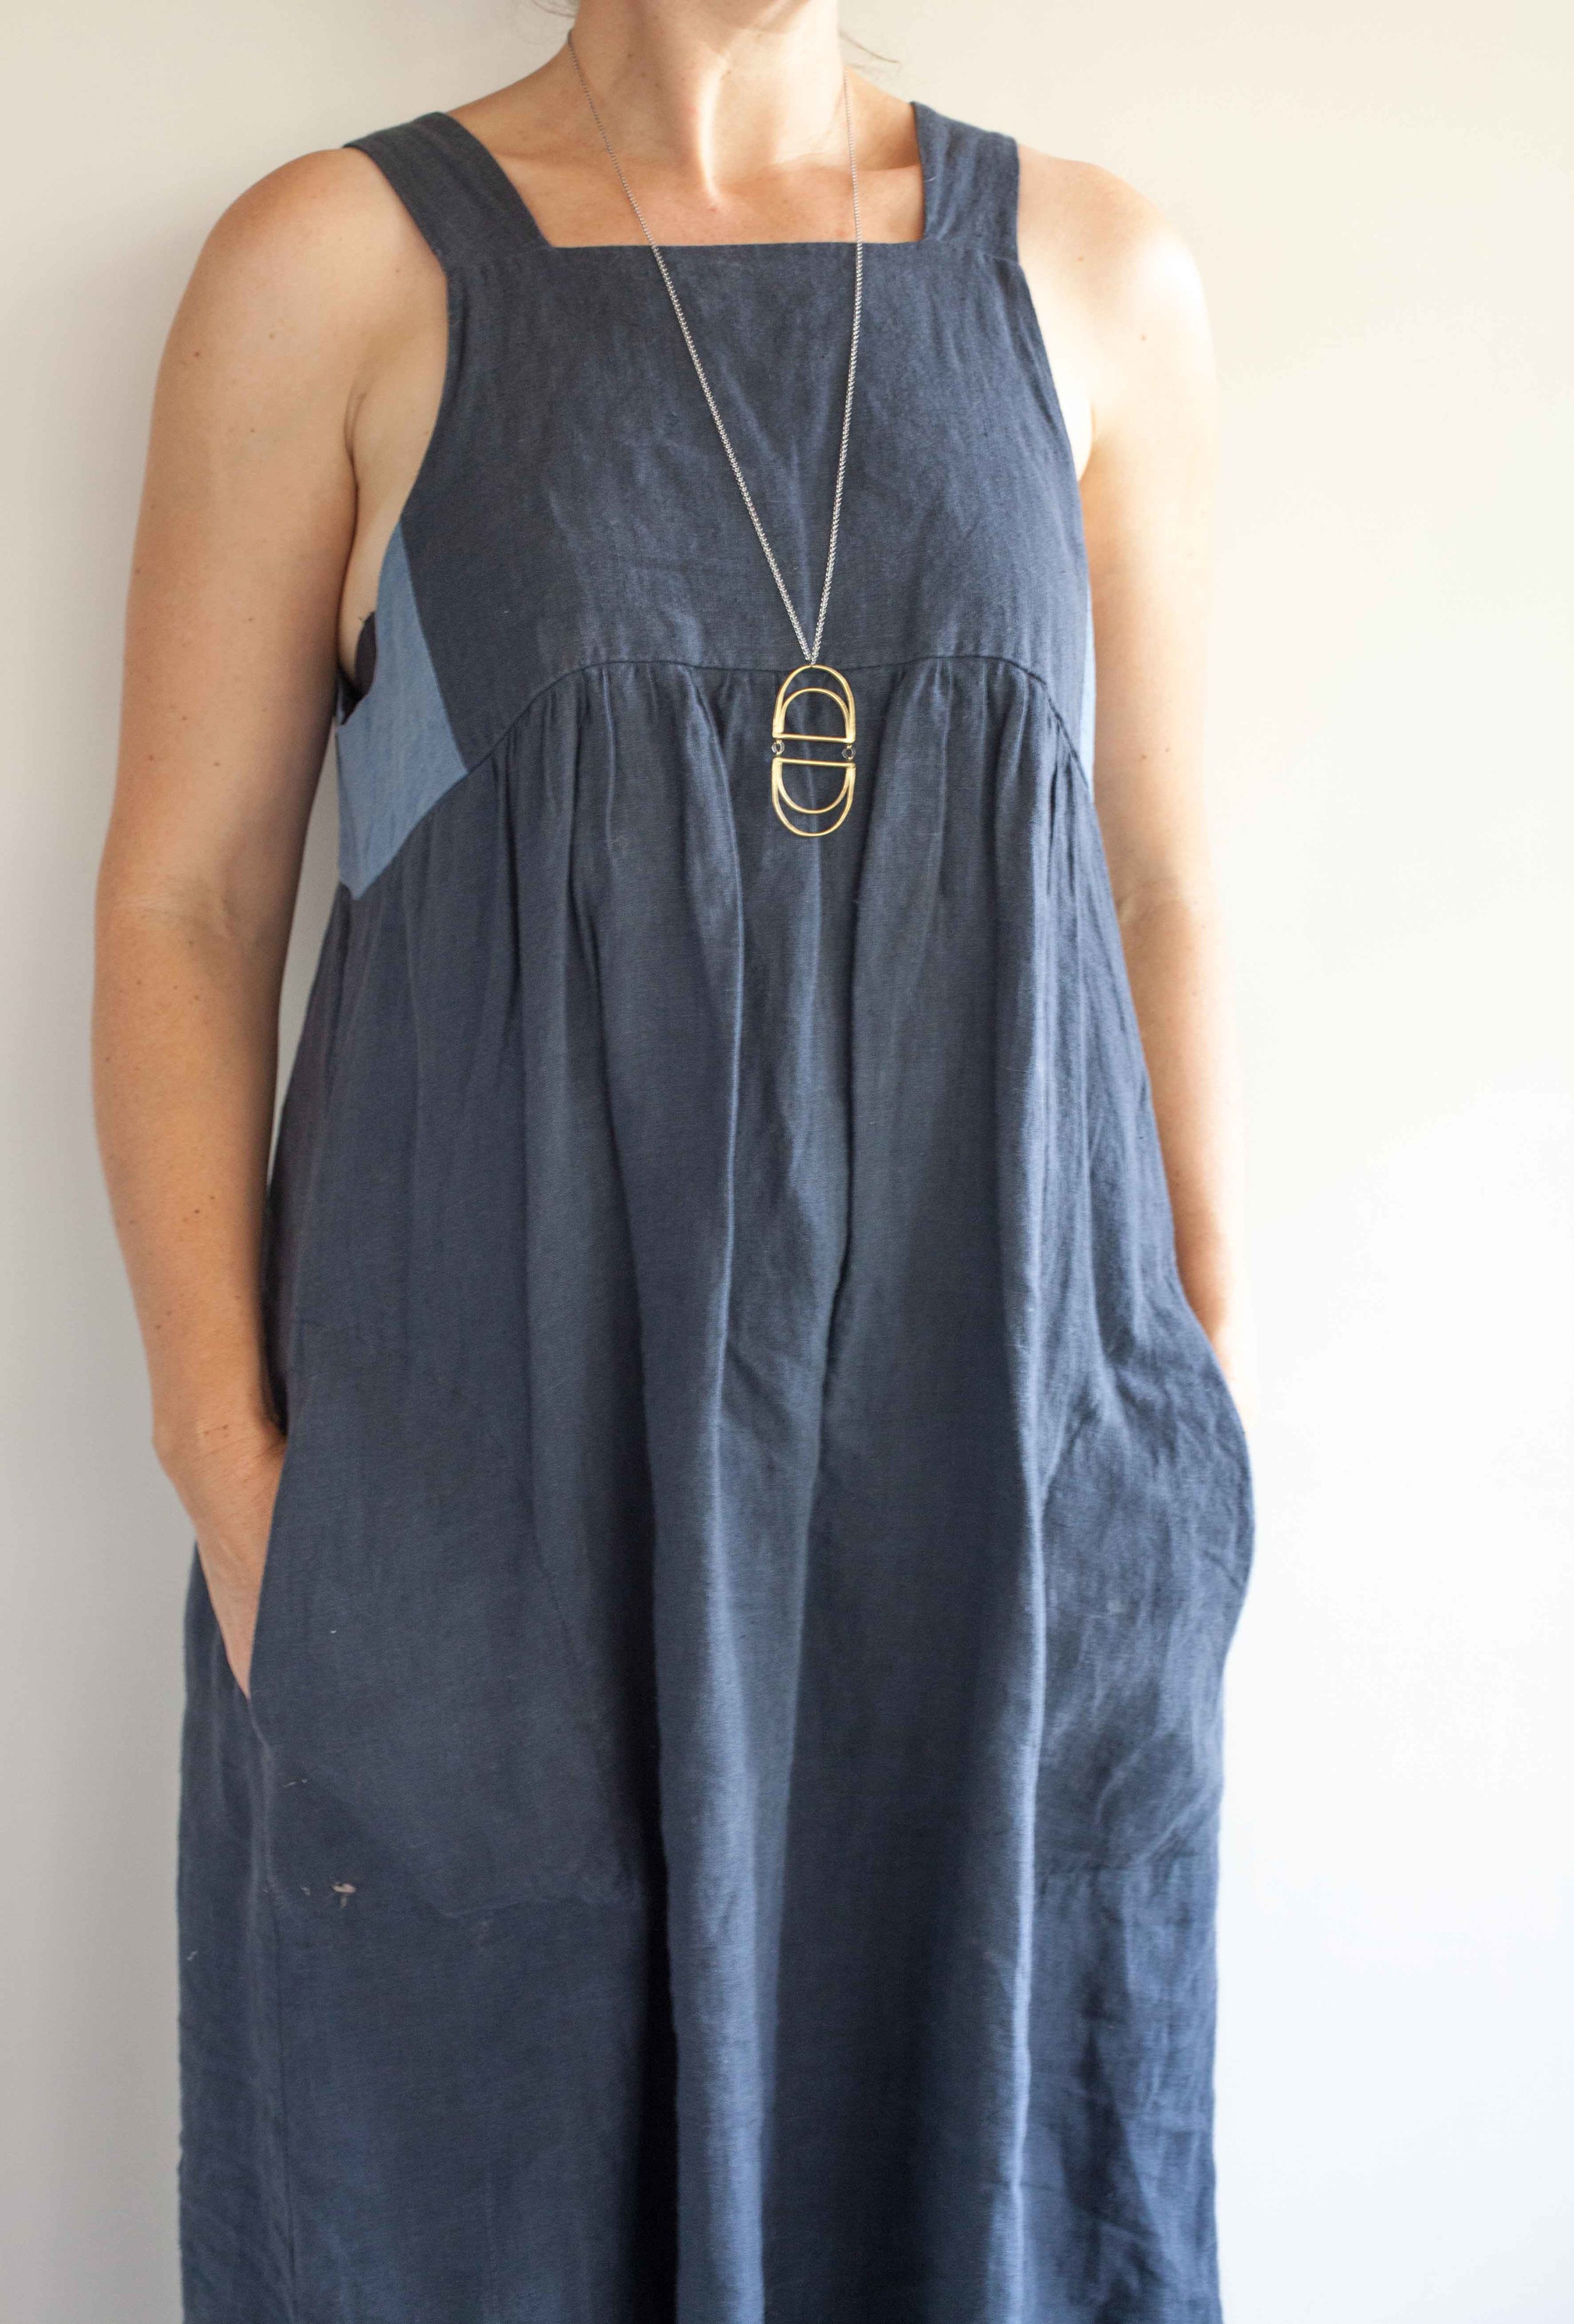 Best Of: Annie Dress — The Craft Sessions